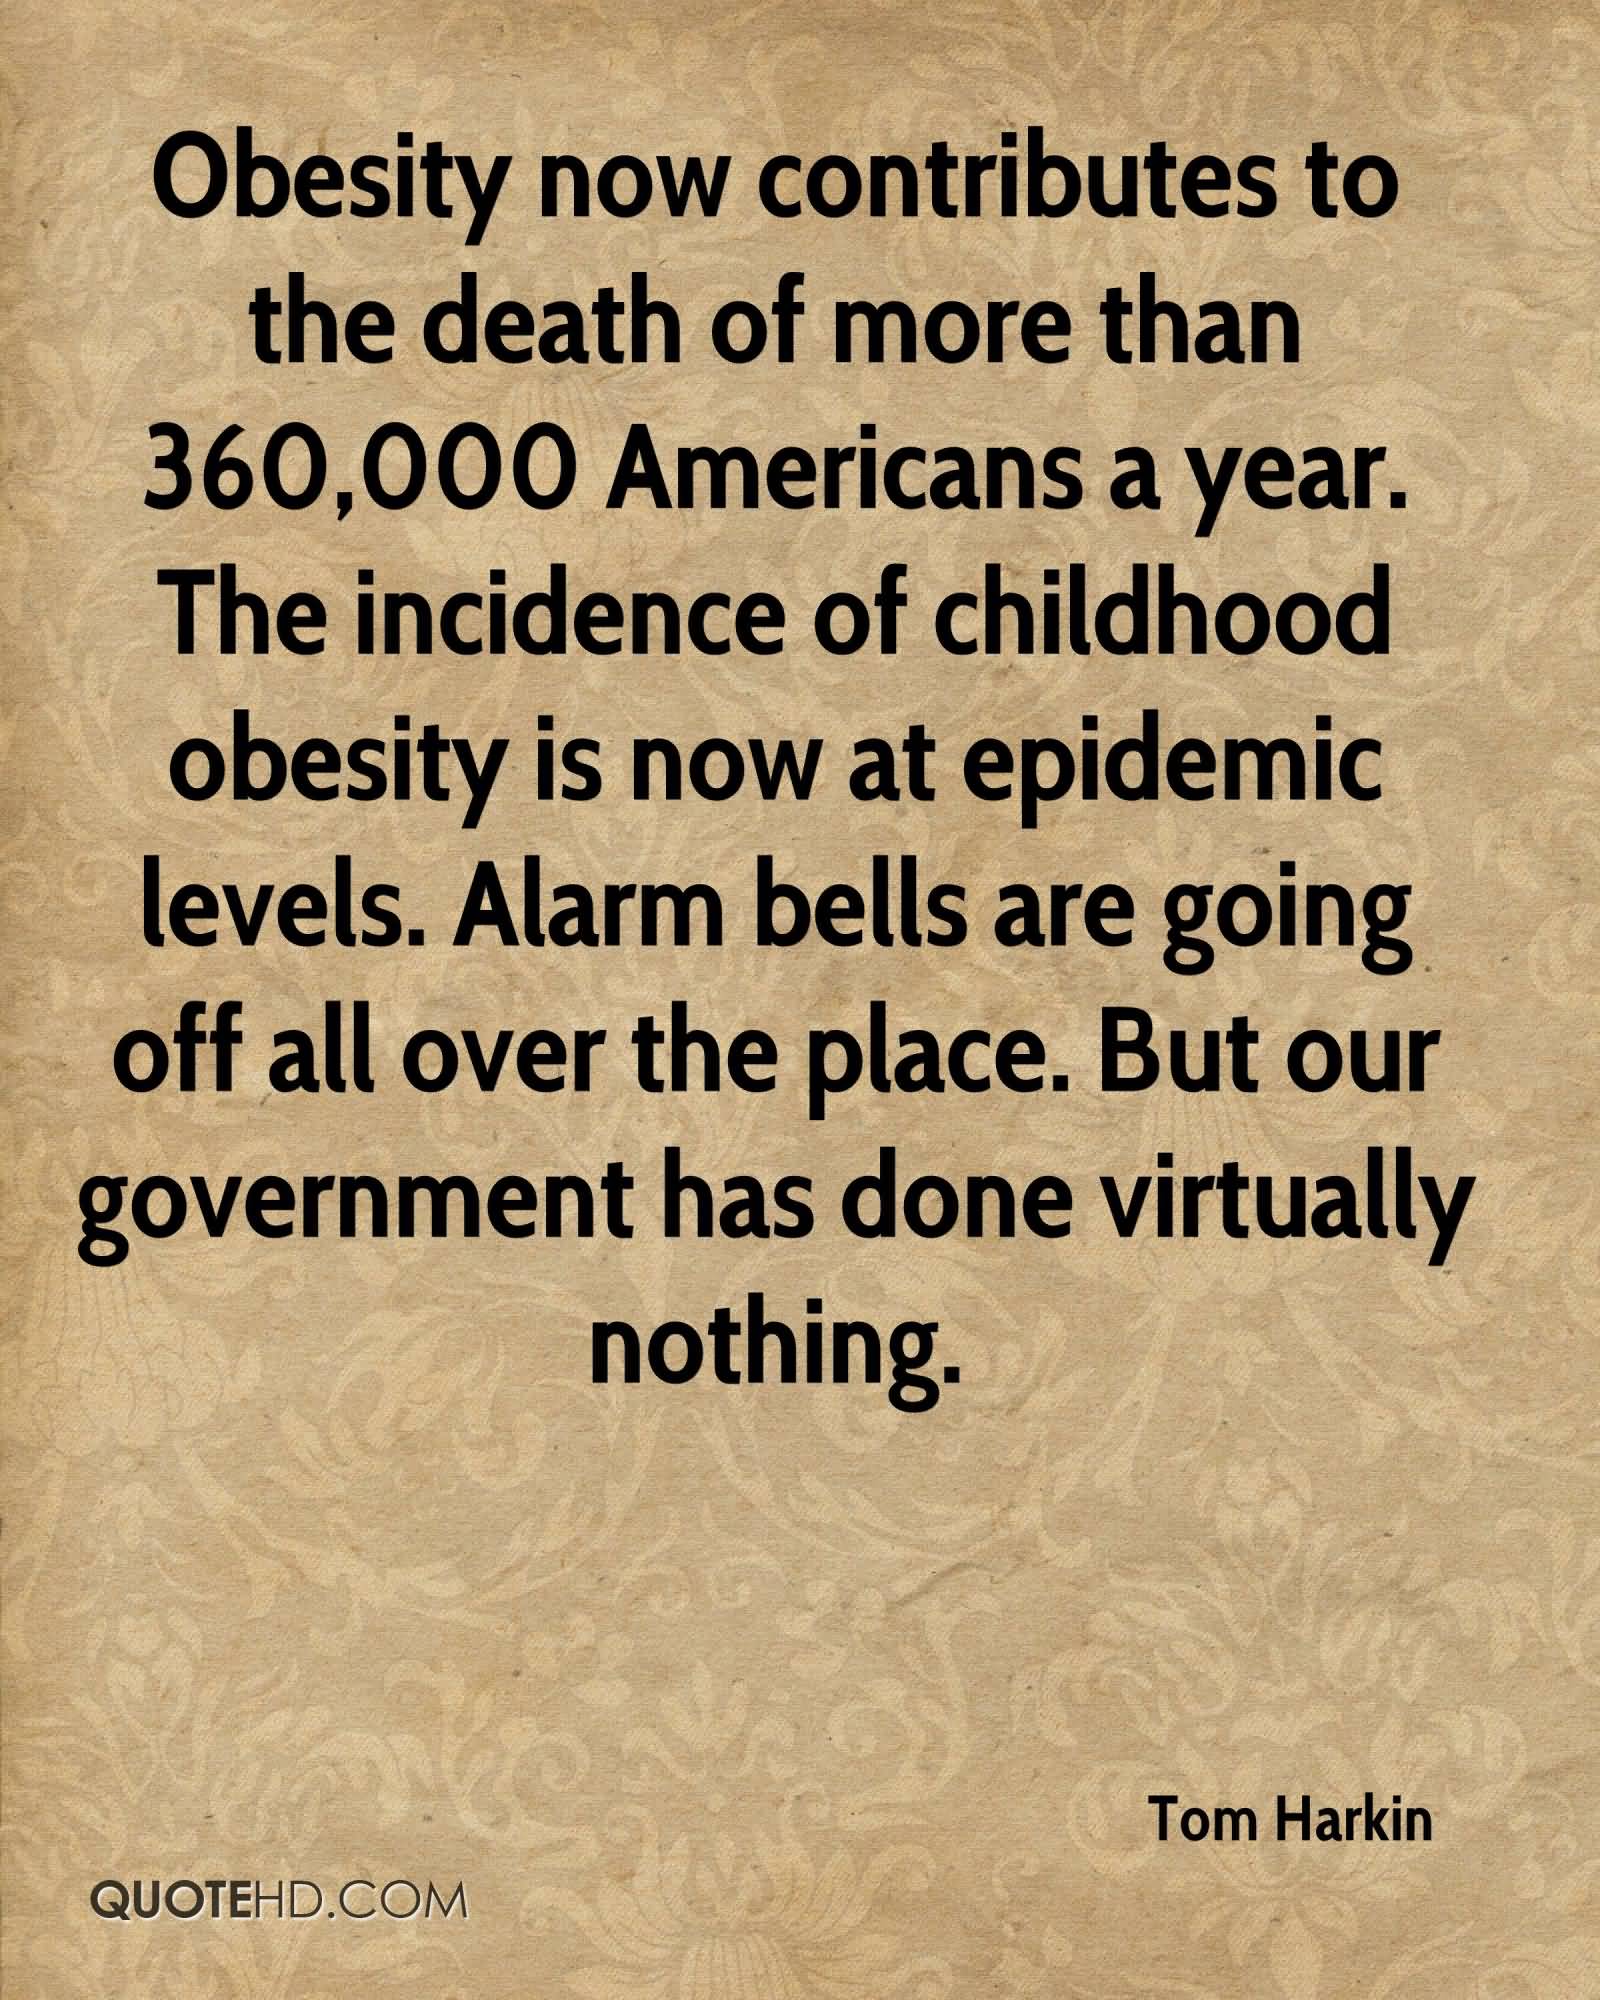 Obesity now contributes to the death of more than 360,000 Americans a year. The incidence of childhood obesity is now at epidemic levels. Alarm bells are going off all over the place. But our government has done virtually nothing.